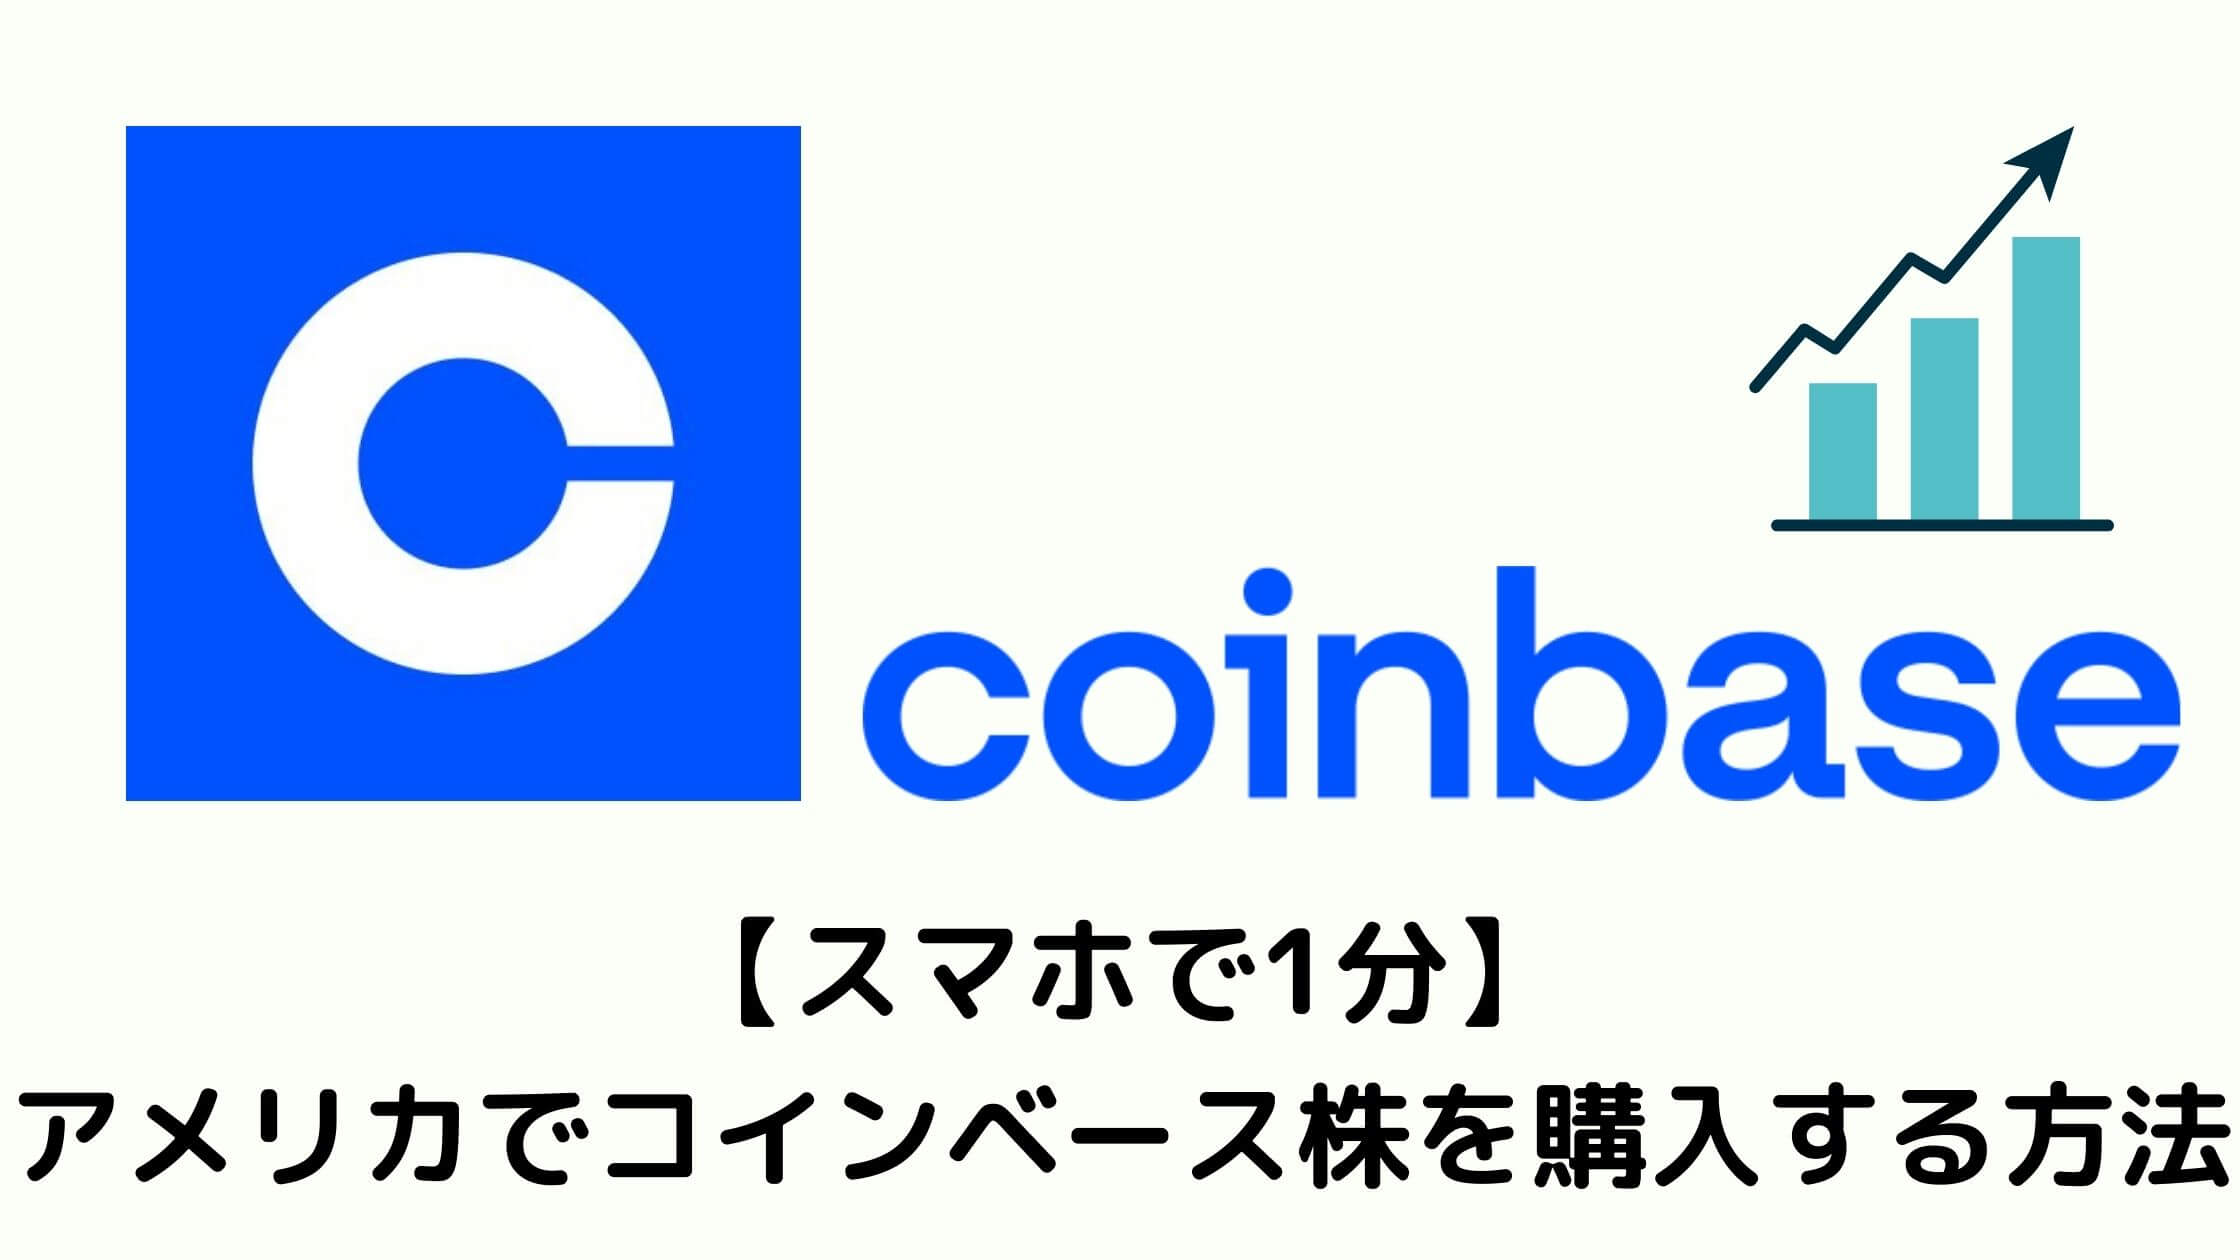 how to buy coinbase stock